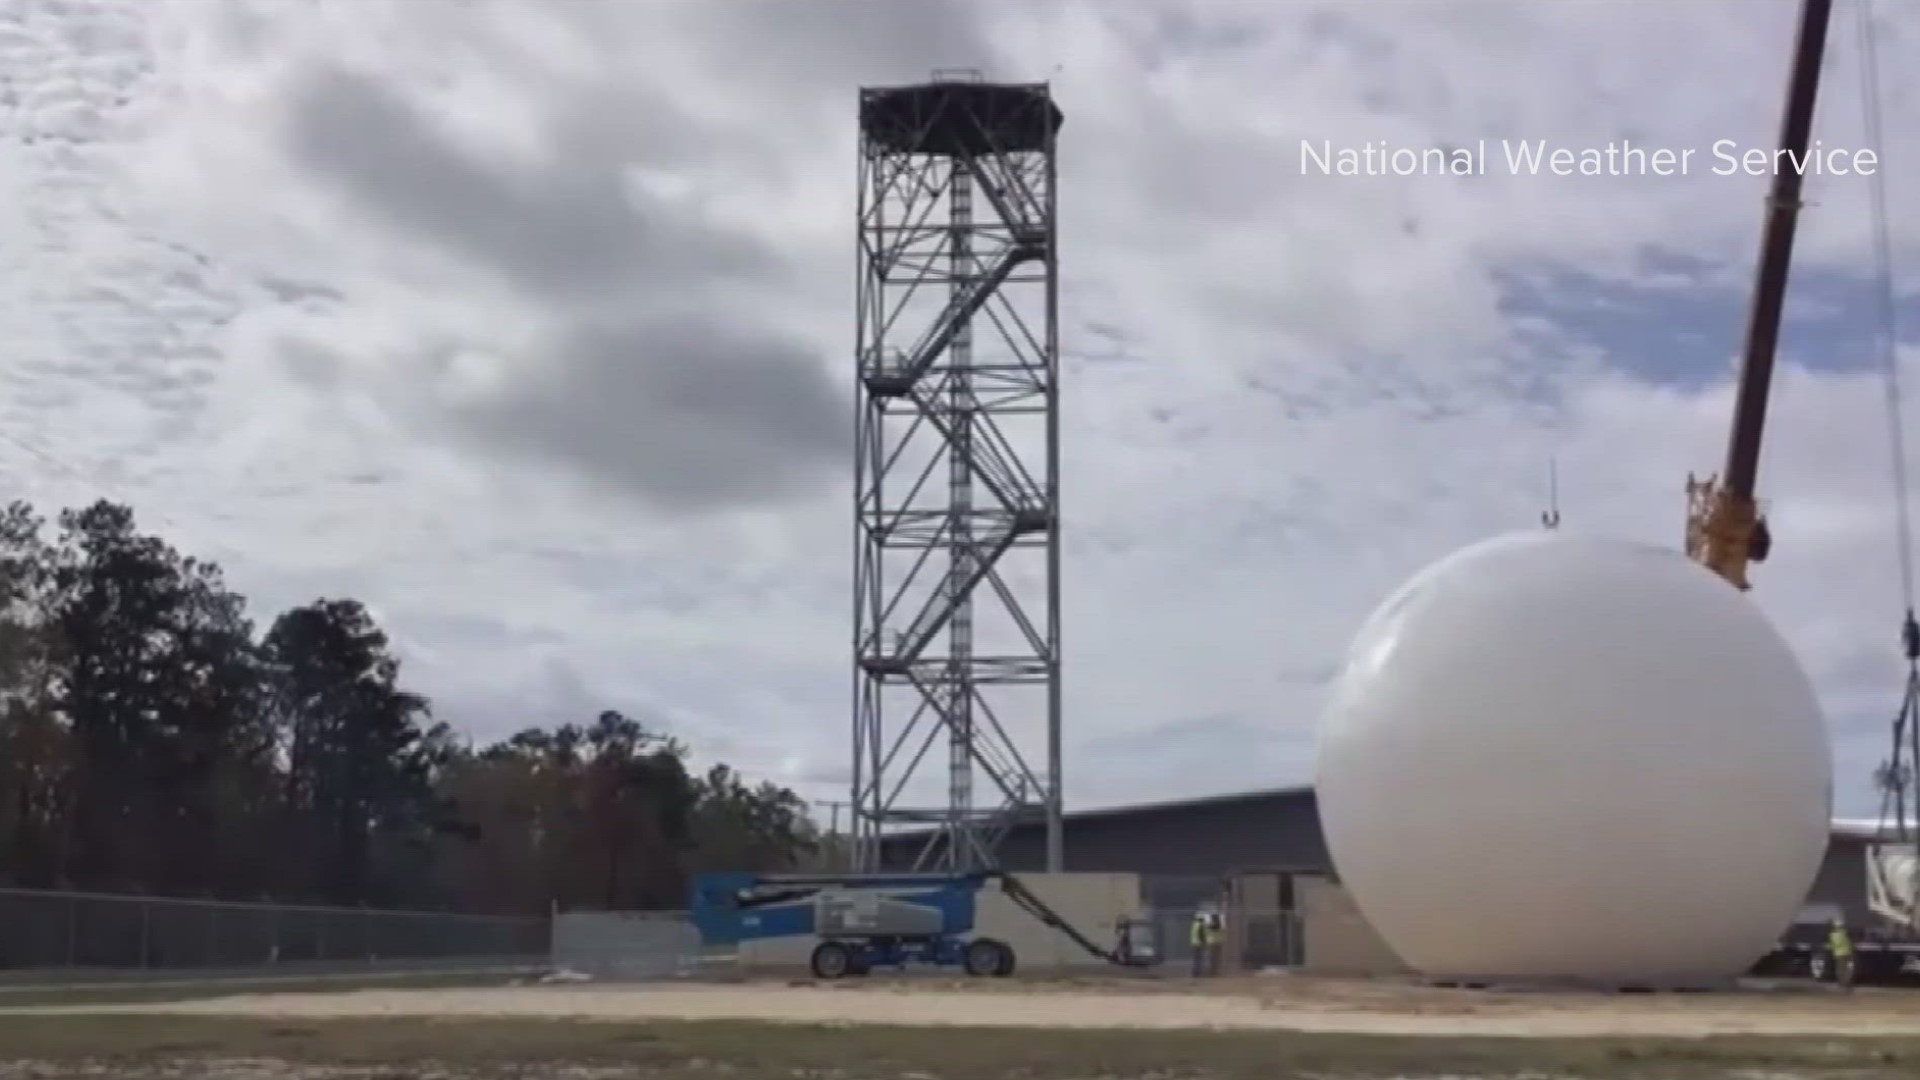 The National Weather Service spent three months transporting and reassembling the radar.